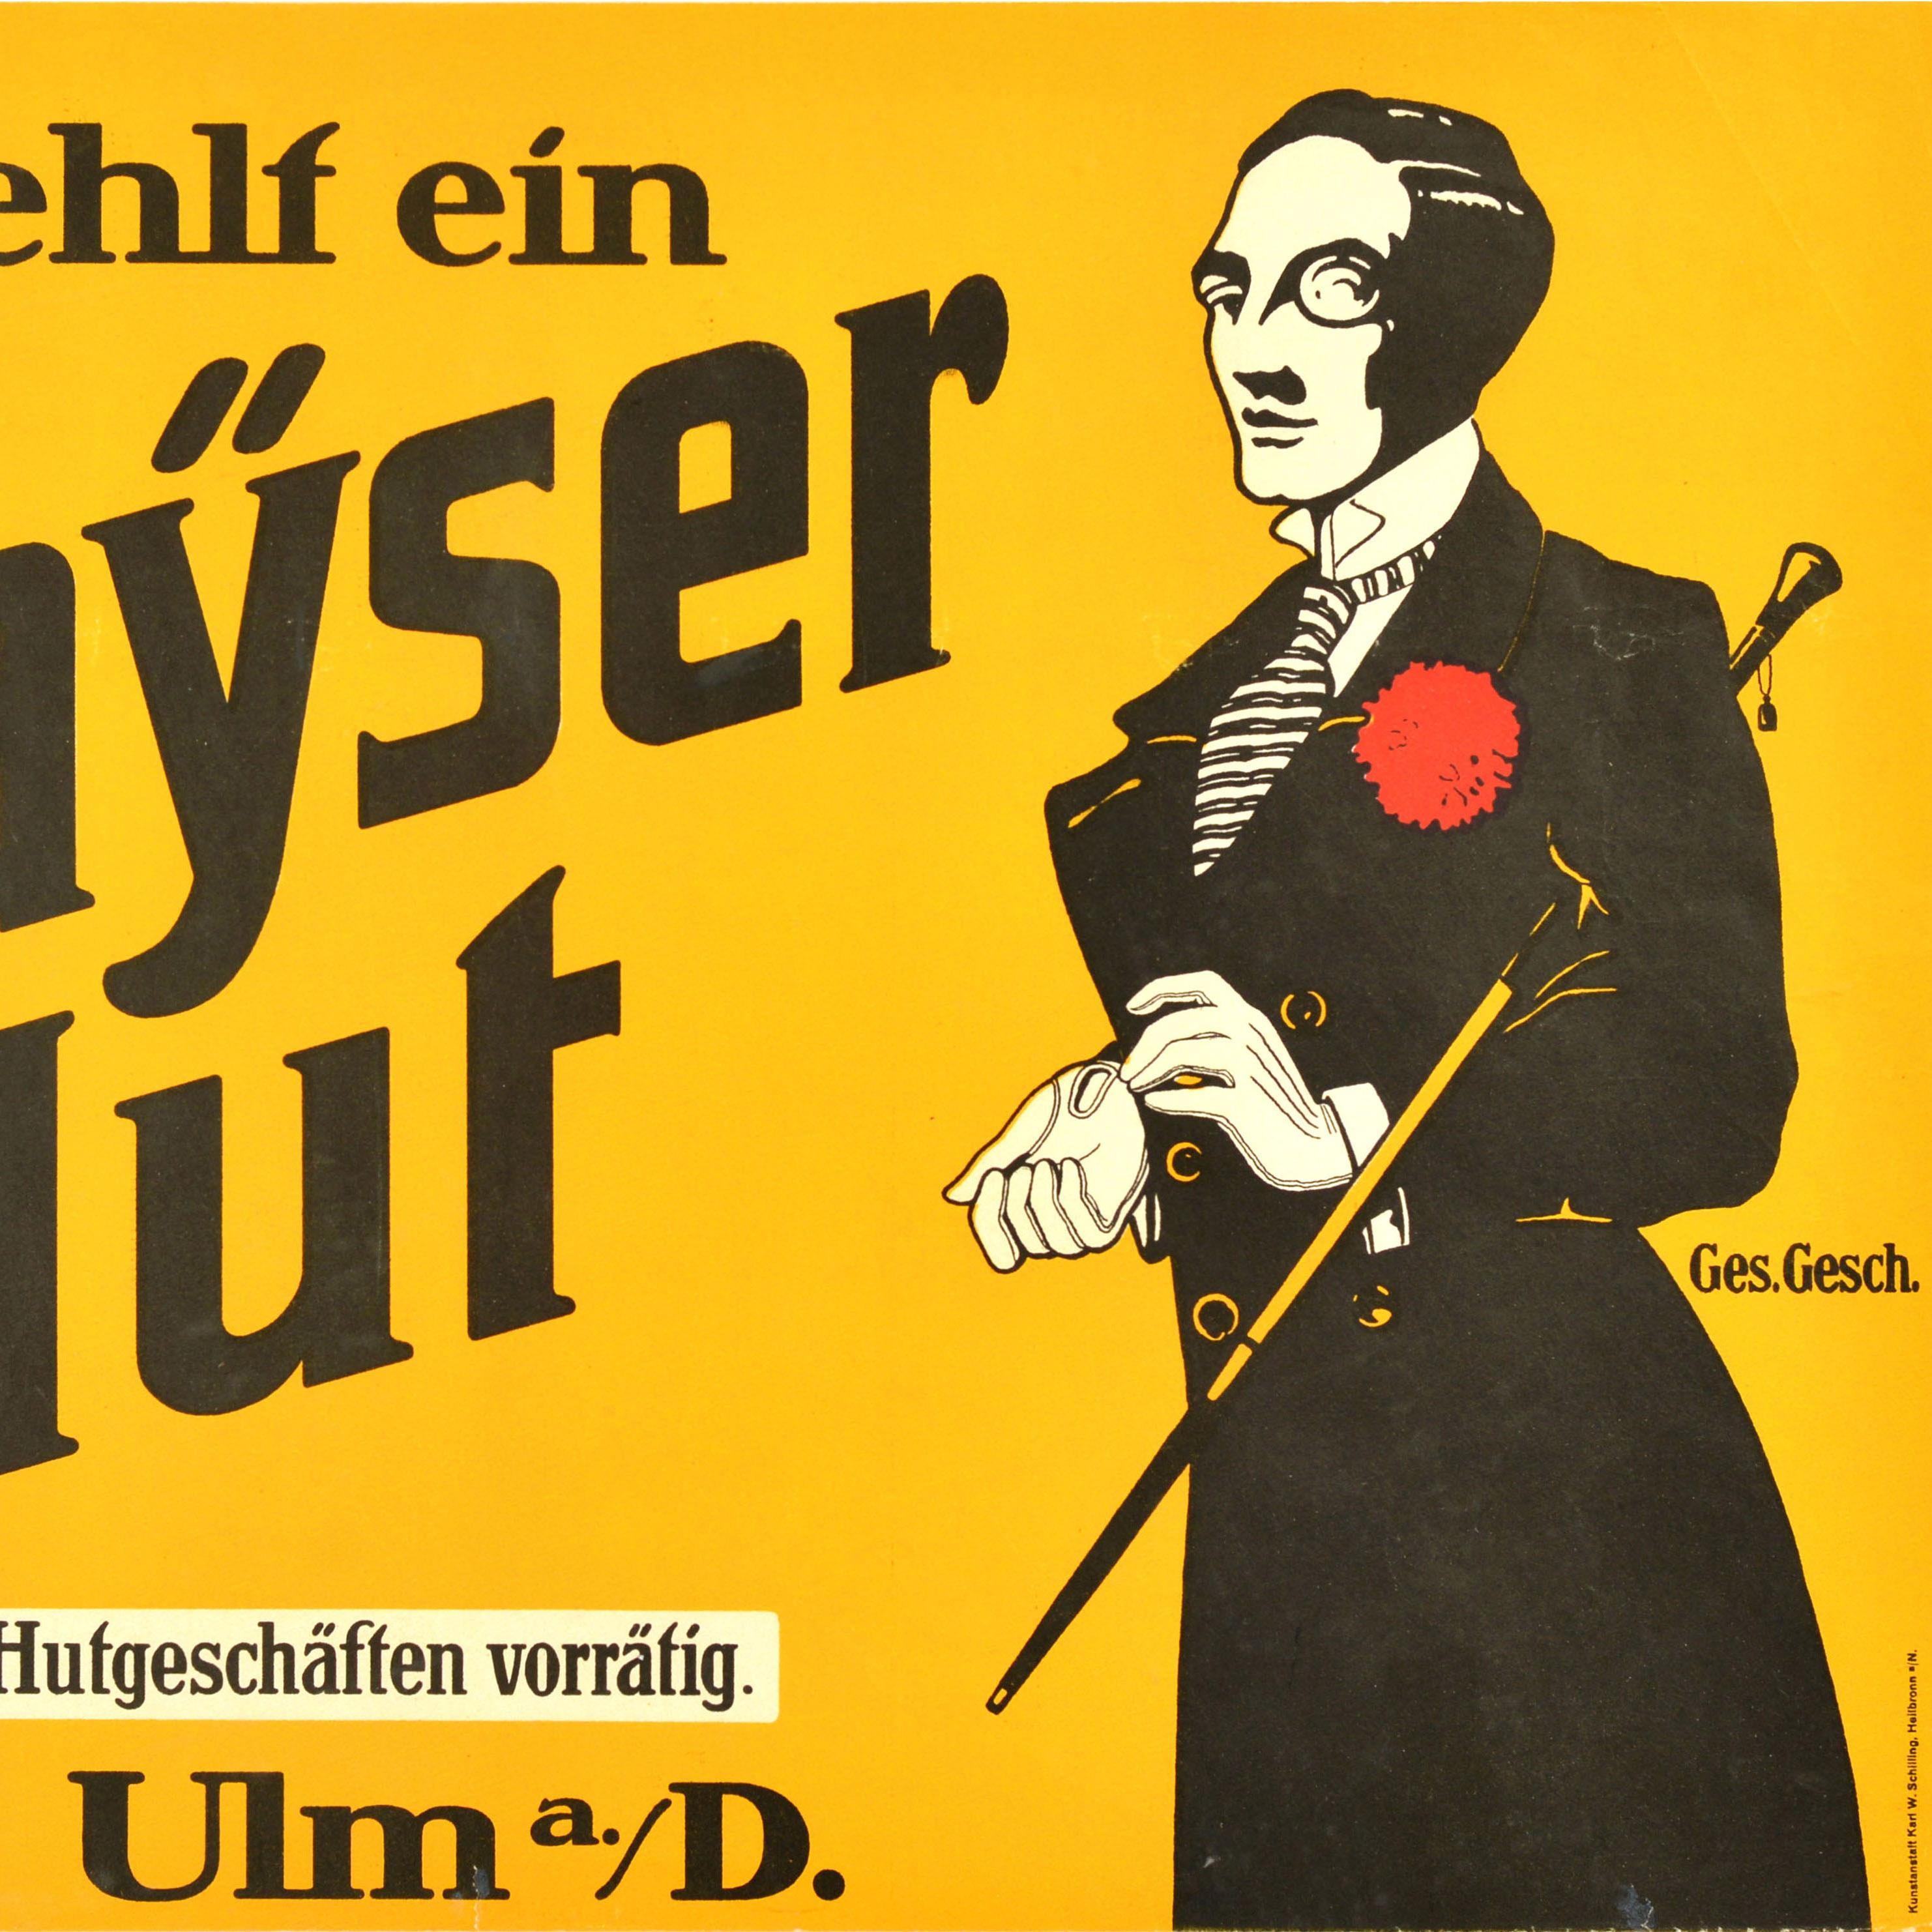 Original antique advertising poster - I'm missing a Mayser Hat / Mir fehlt ein Mayser Hut - featuring a great design depicting a smartly dressed man wearing a suit with a red rosette flower in the pocket, a monocle eye glass, gloves and holding a